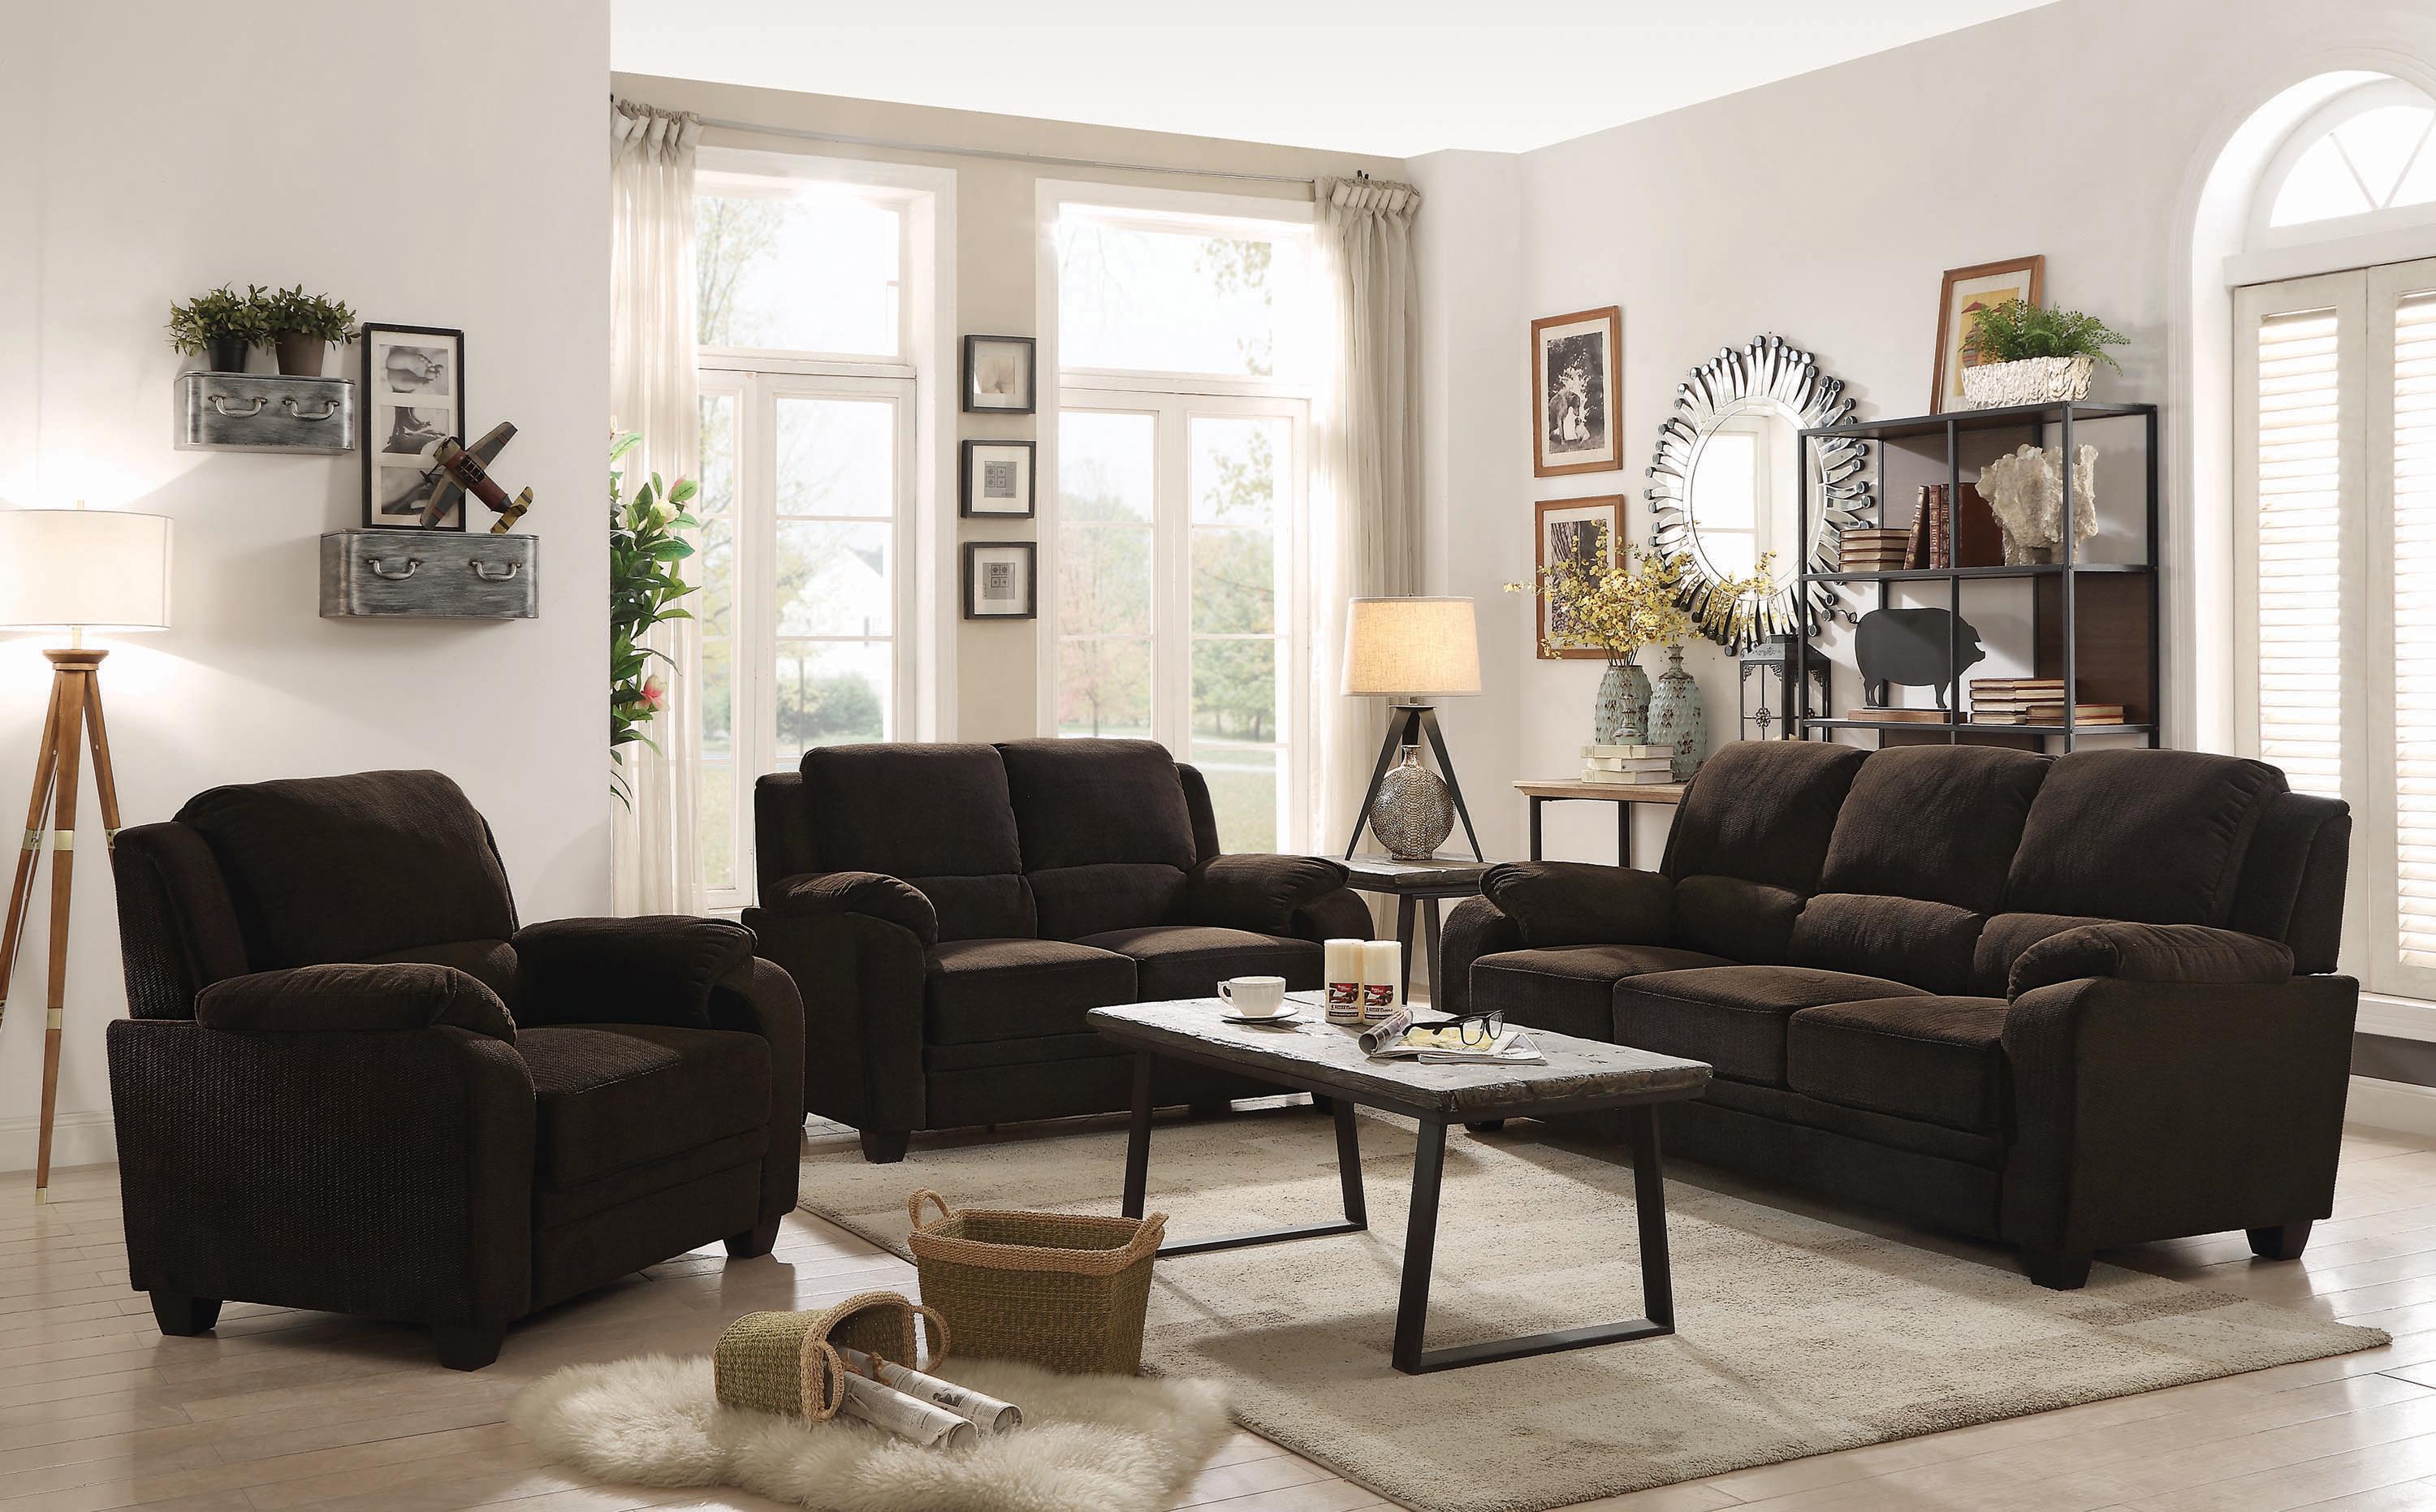 Transitional Living Room Set 506244-S2 Northend 506244-S2 in Chocolate 